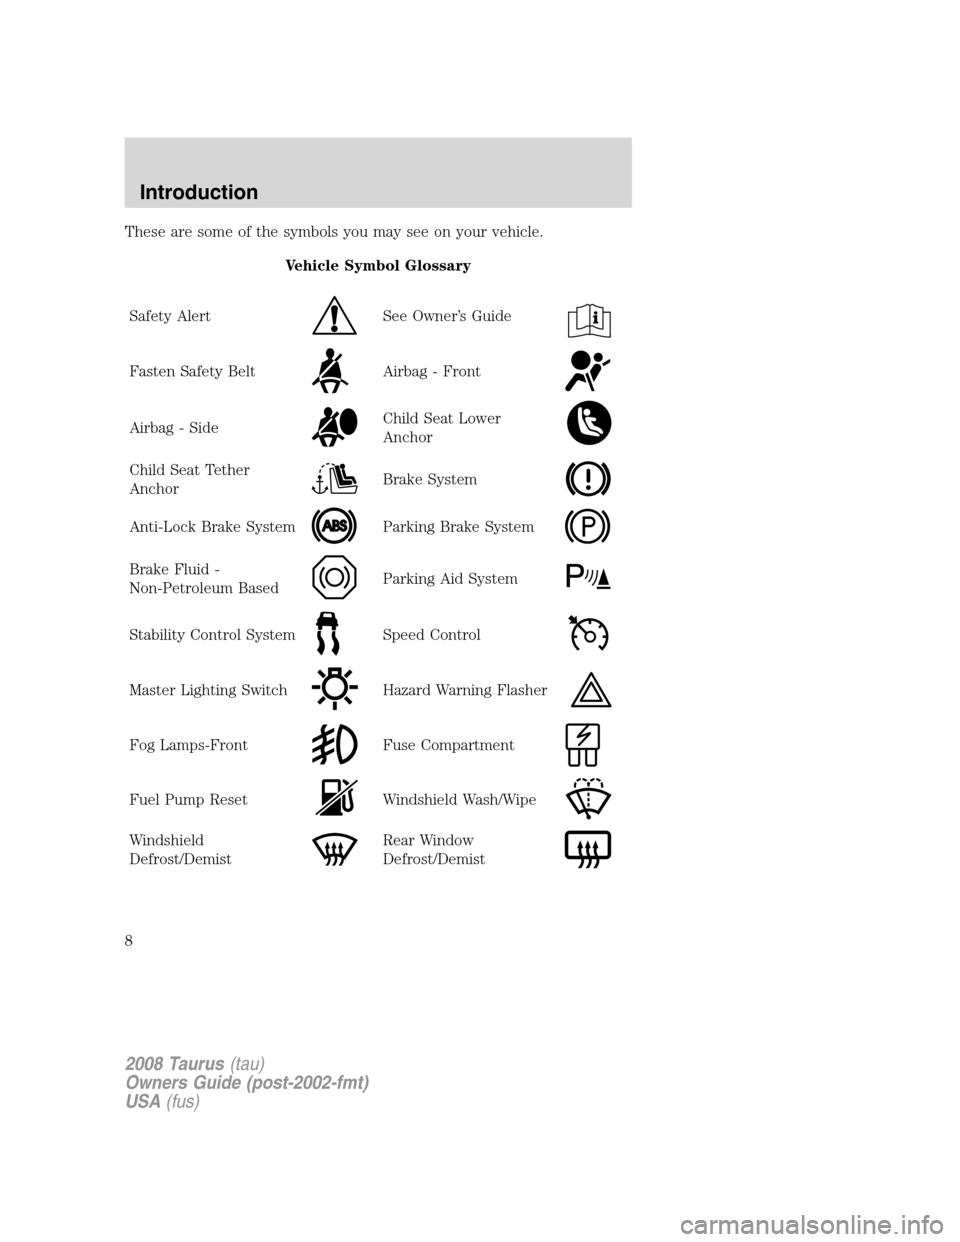 FORD TAURUS 2008 5.G Owners Manual These are some of the symbols you may see on your vehicle.
Vehicle Symbol Glossary
Safety Alert
See Owner’s Guide
Fasten Safety BeltAirbag - Front
Airbag - SideChild Seat Lower
Anchor
Child Seat Tet